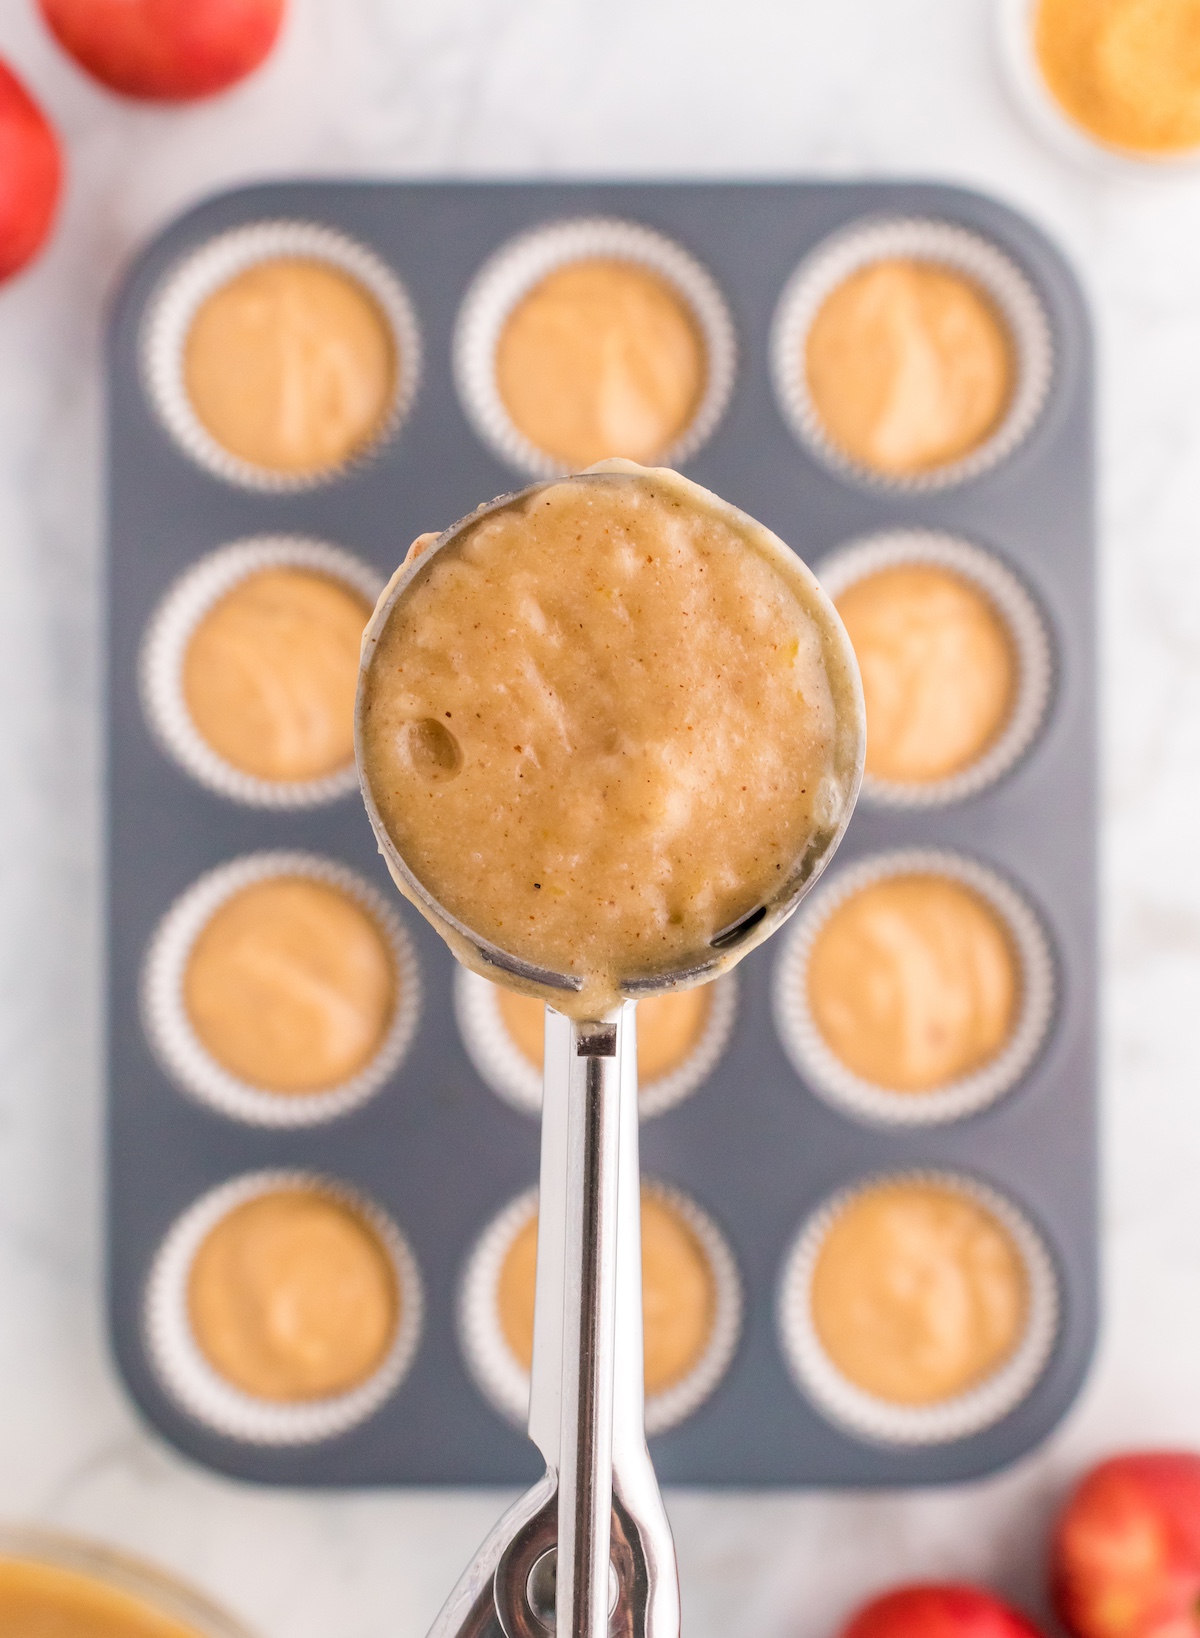 spooning the apple cider batter into the muffin tin